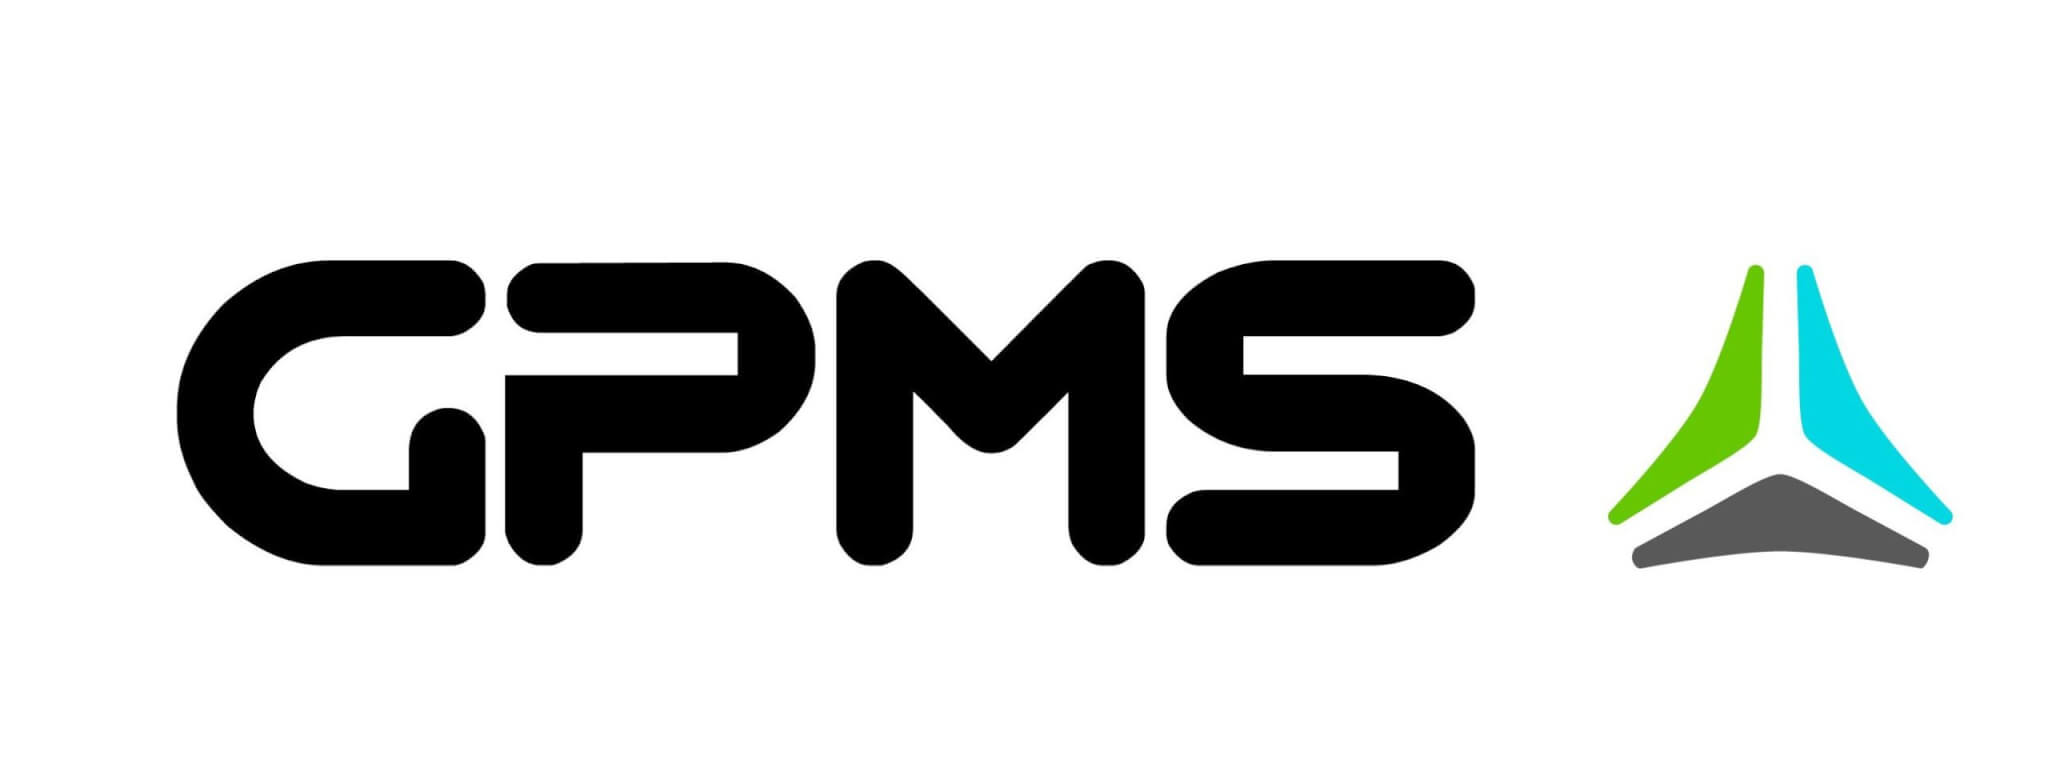 Press Release: GPMS Announces Partnership with Ronnie Fahy to Lead Expansion in Asia-Pacific Region